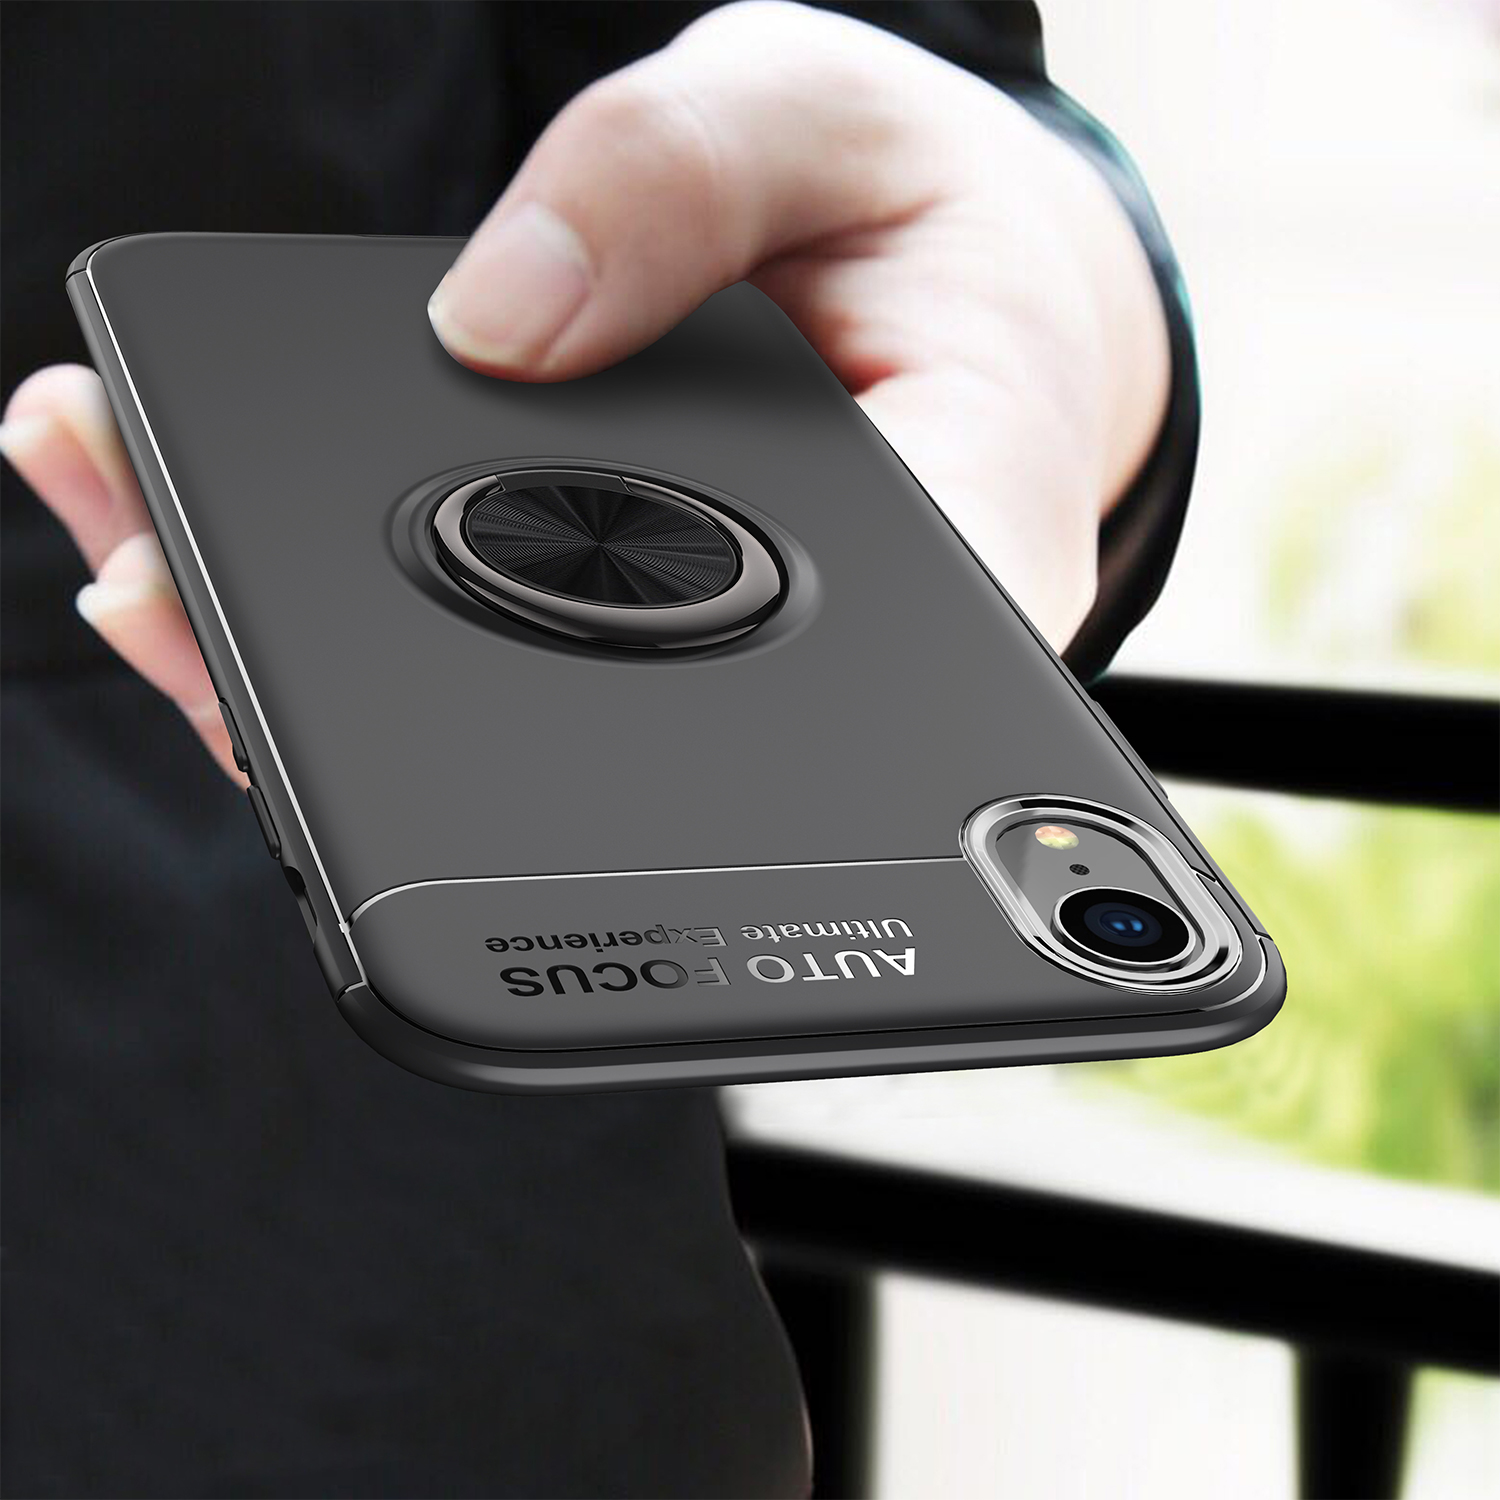 

C-KU Protective Case For iPhone XR 360º Rotating Ring Grip Kicktand Back Cover